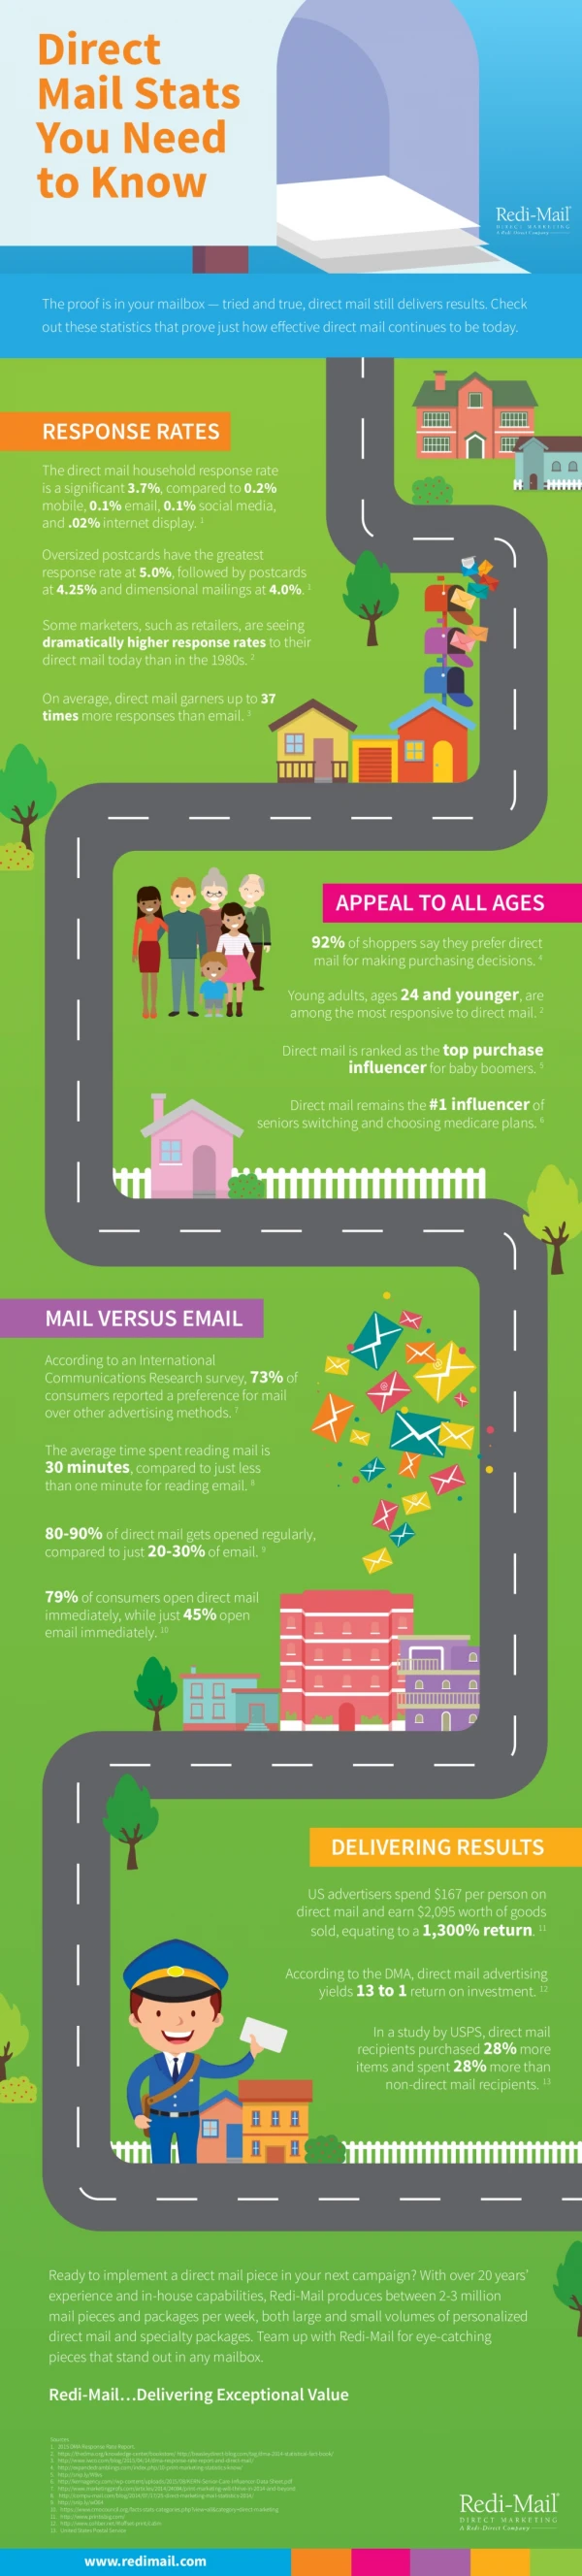 Direct Mail Stats you need to know